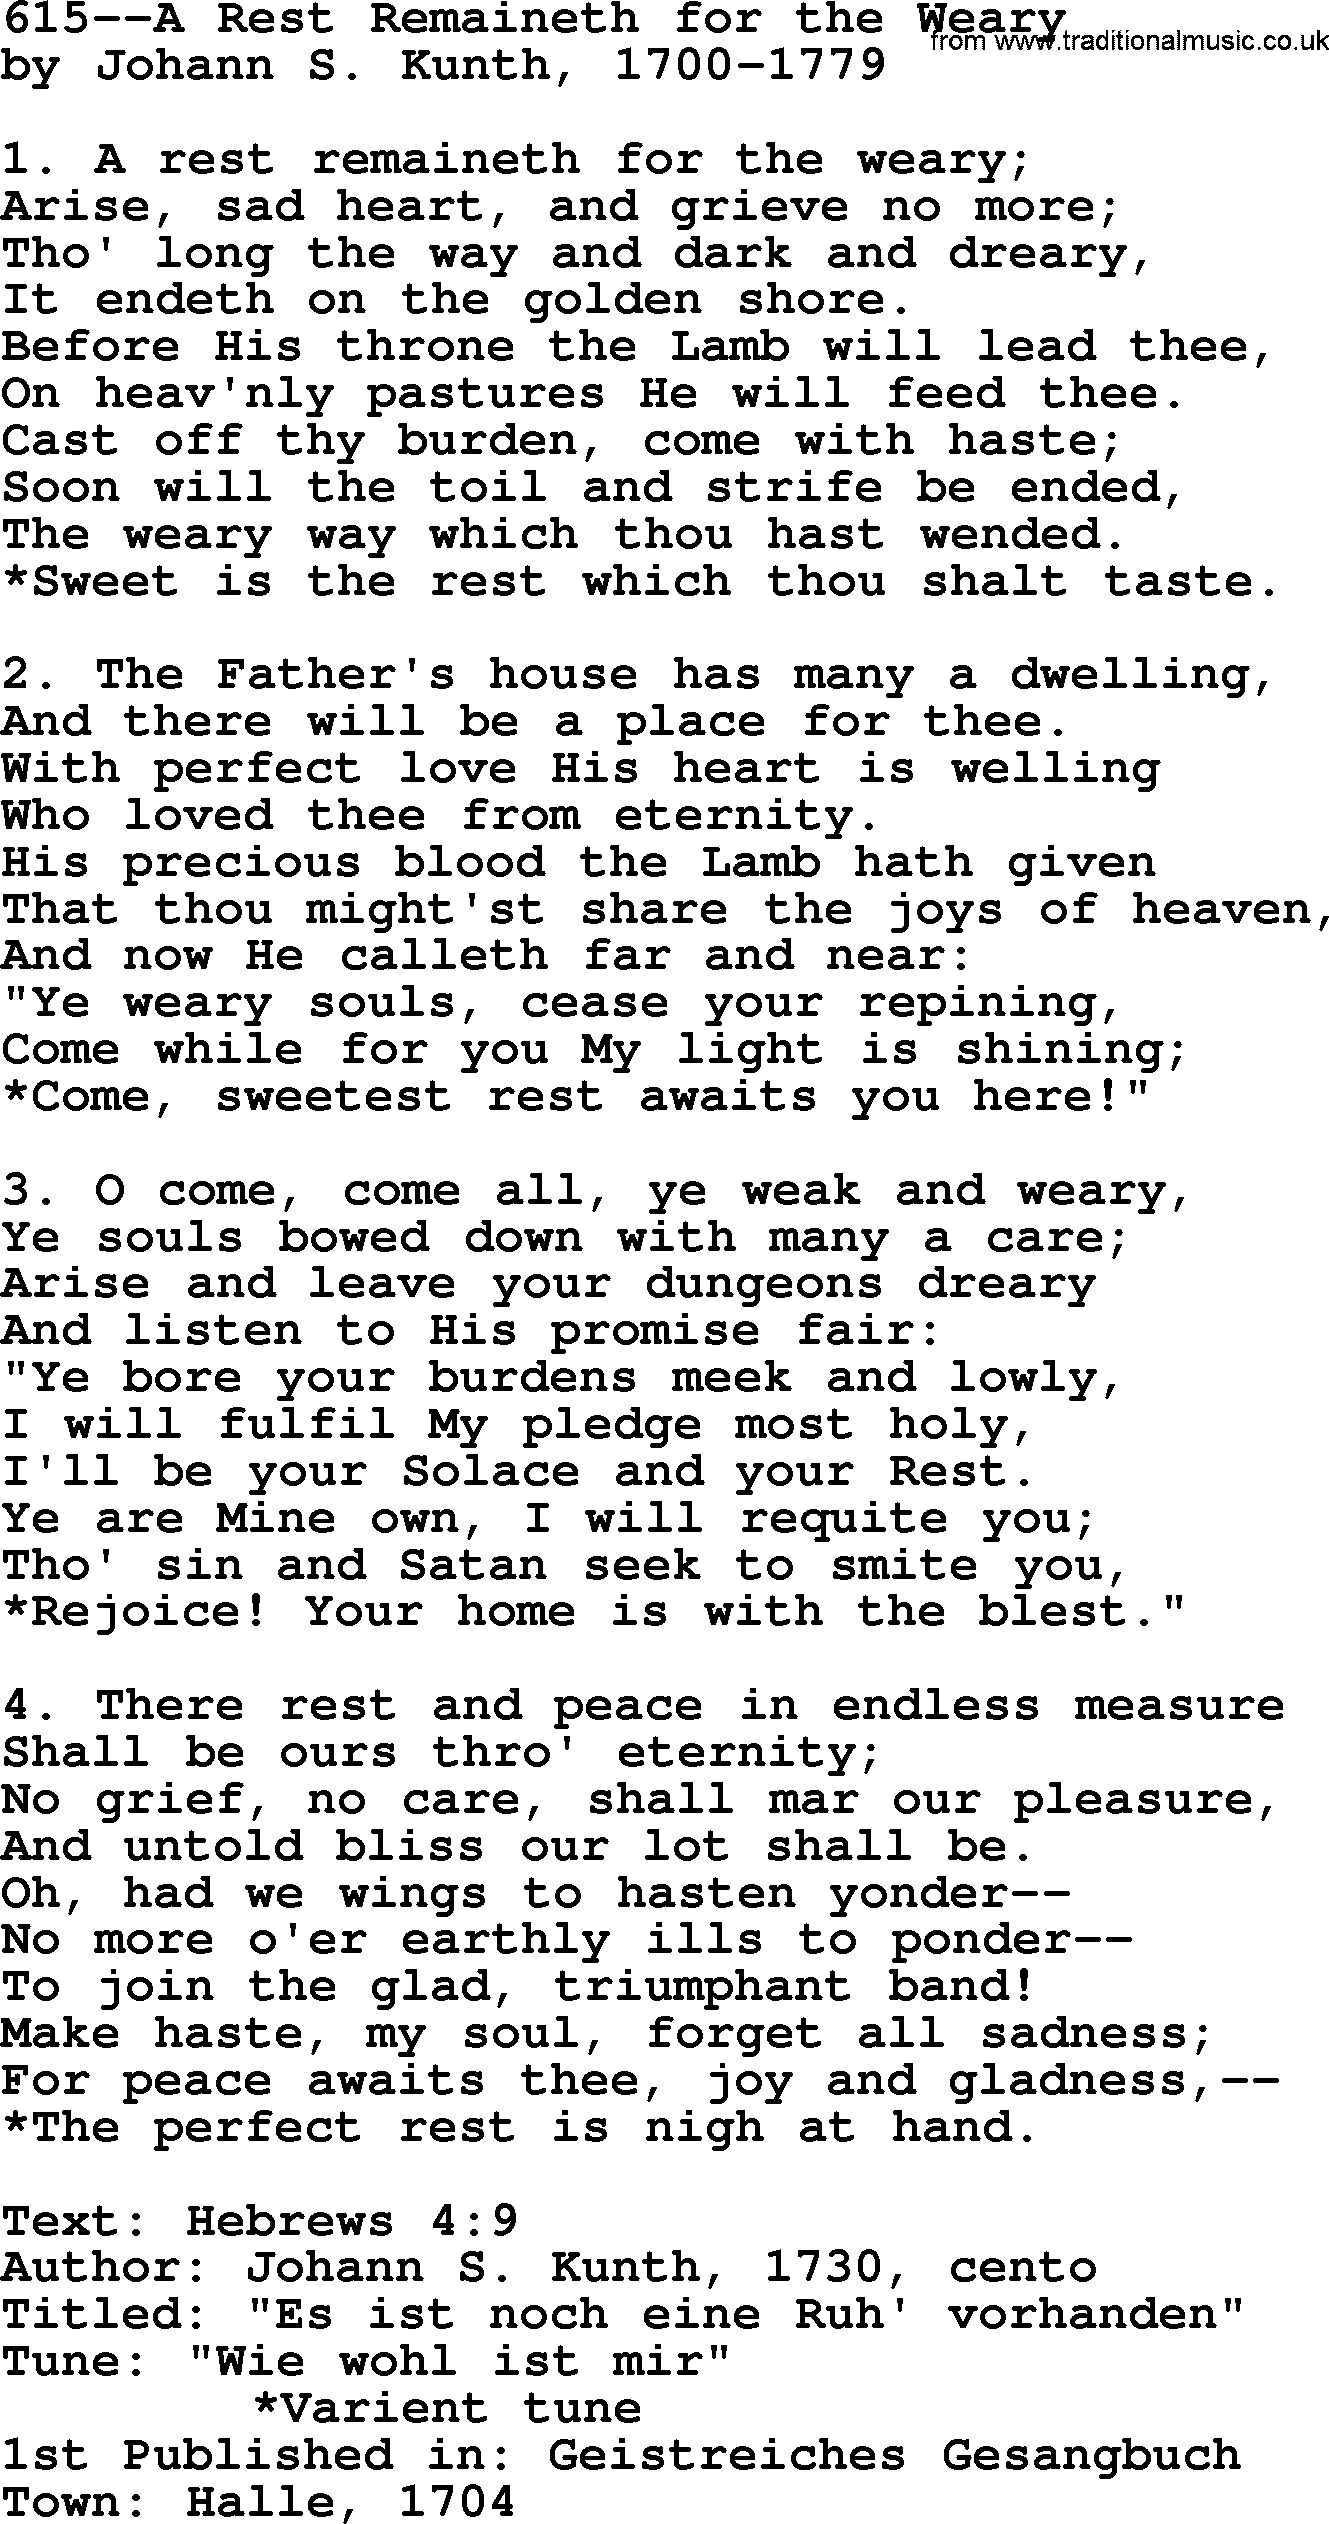 Lutheran Hymn: 615--A Rest Remaineth for the Weary.txt lyrics with PDF